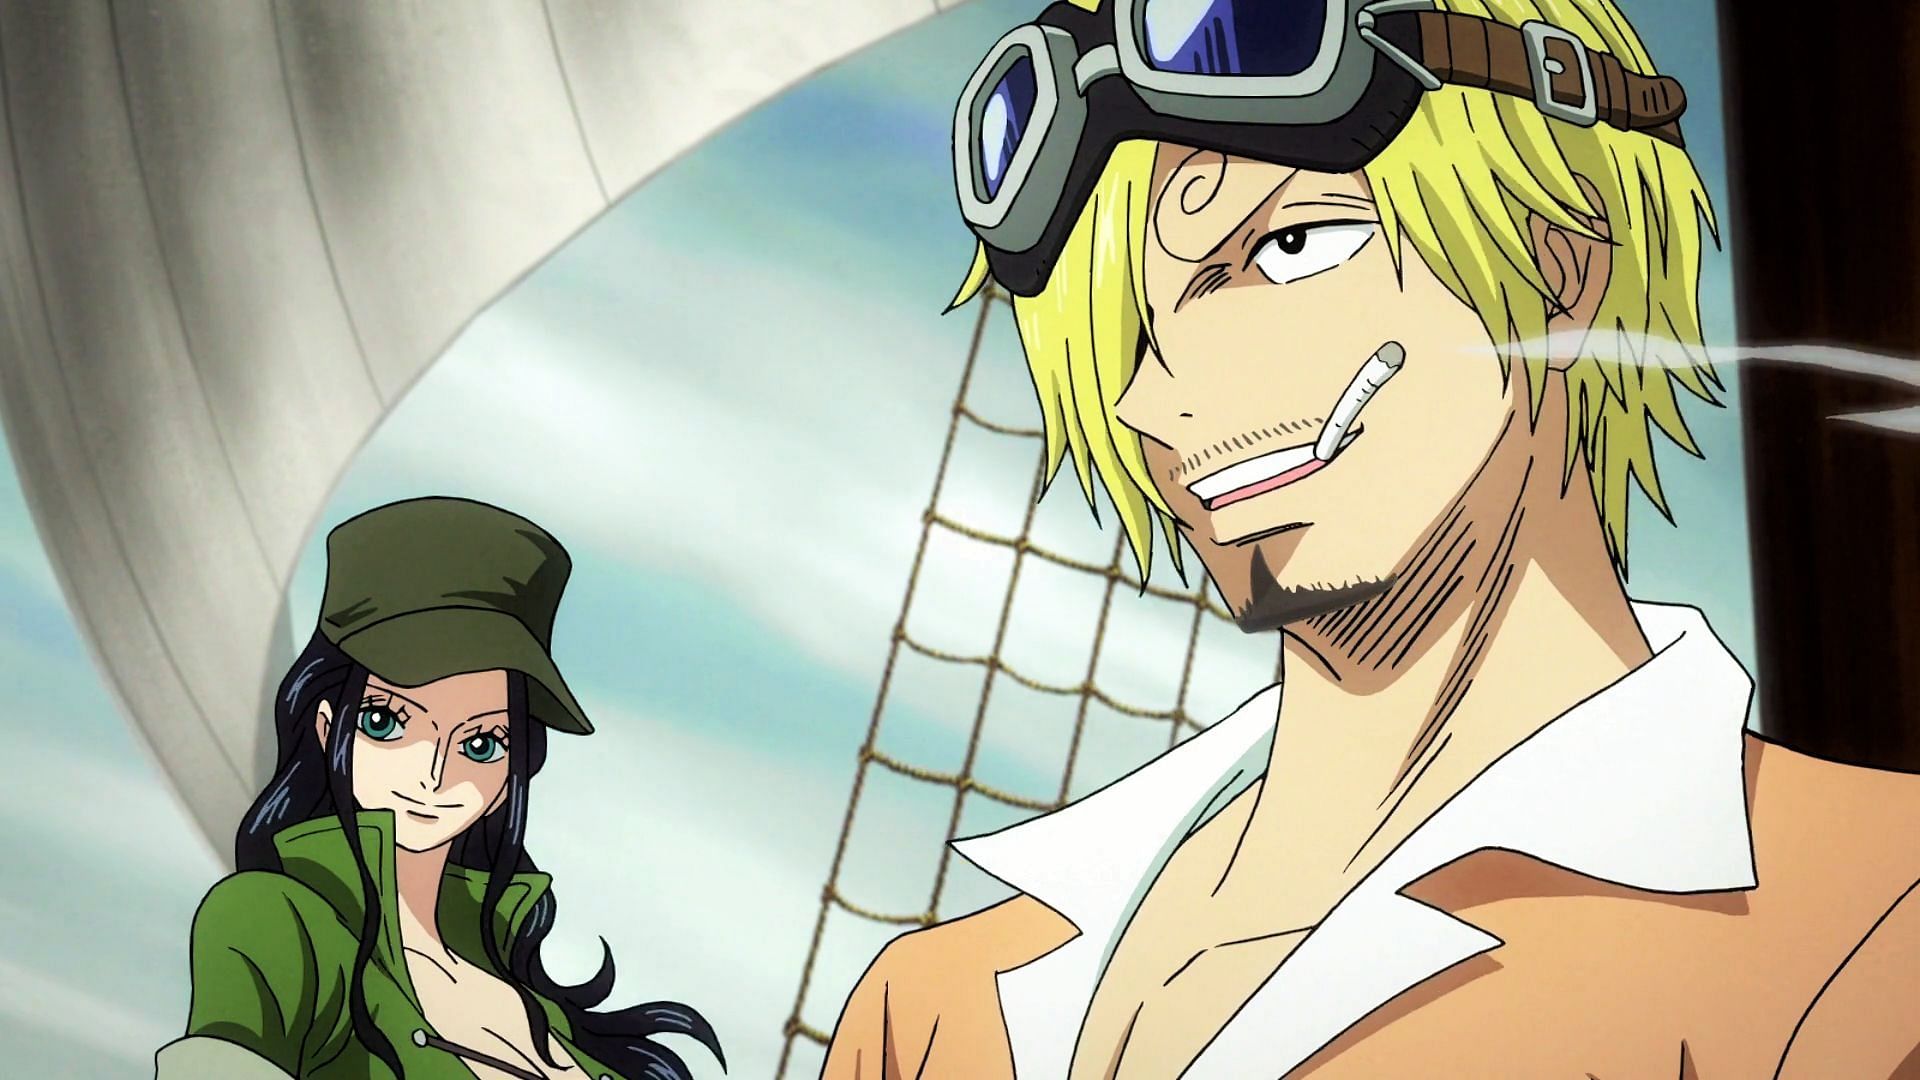 One Piece Shares Preview for Episode 1020: Watch